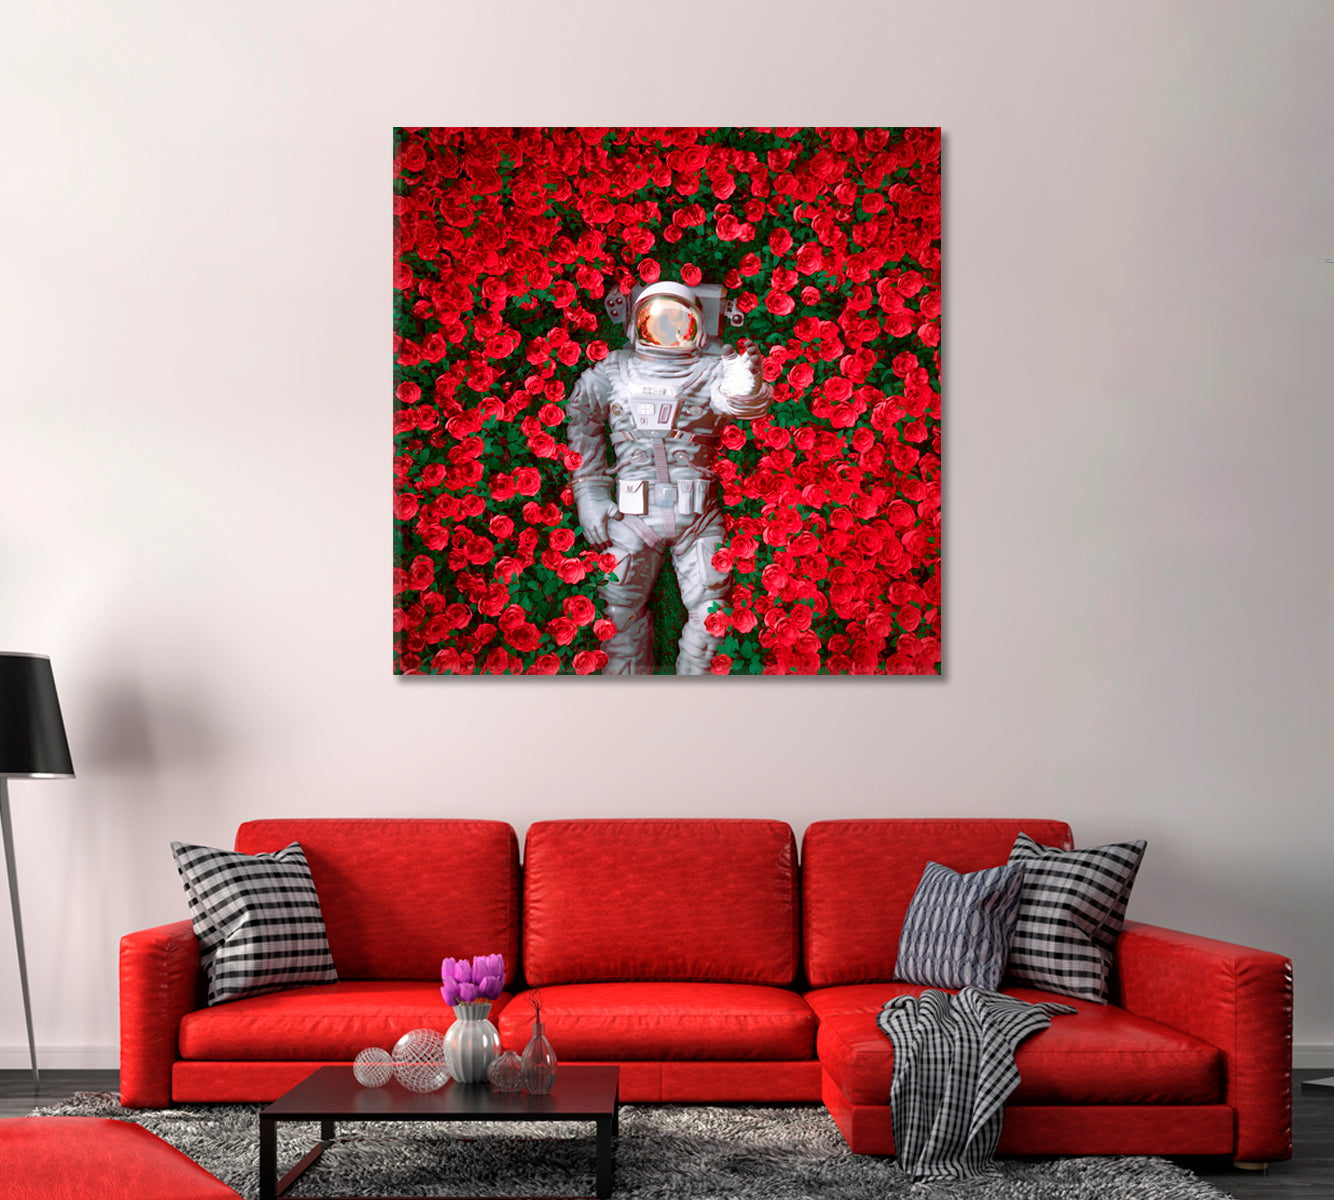 Spaceman in Red Roses Canvas Print-Canvas Print-CetArt-1 panel-12x12 inches-CetArt